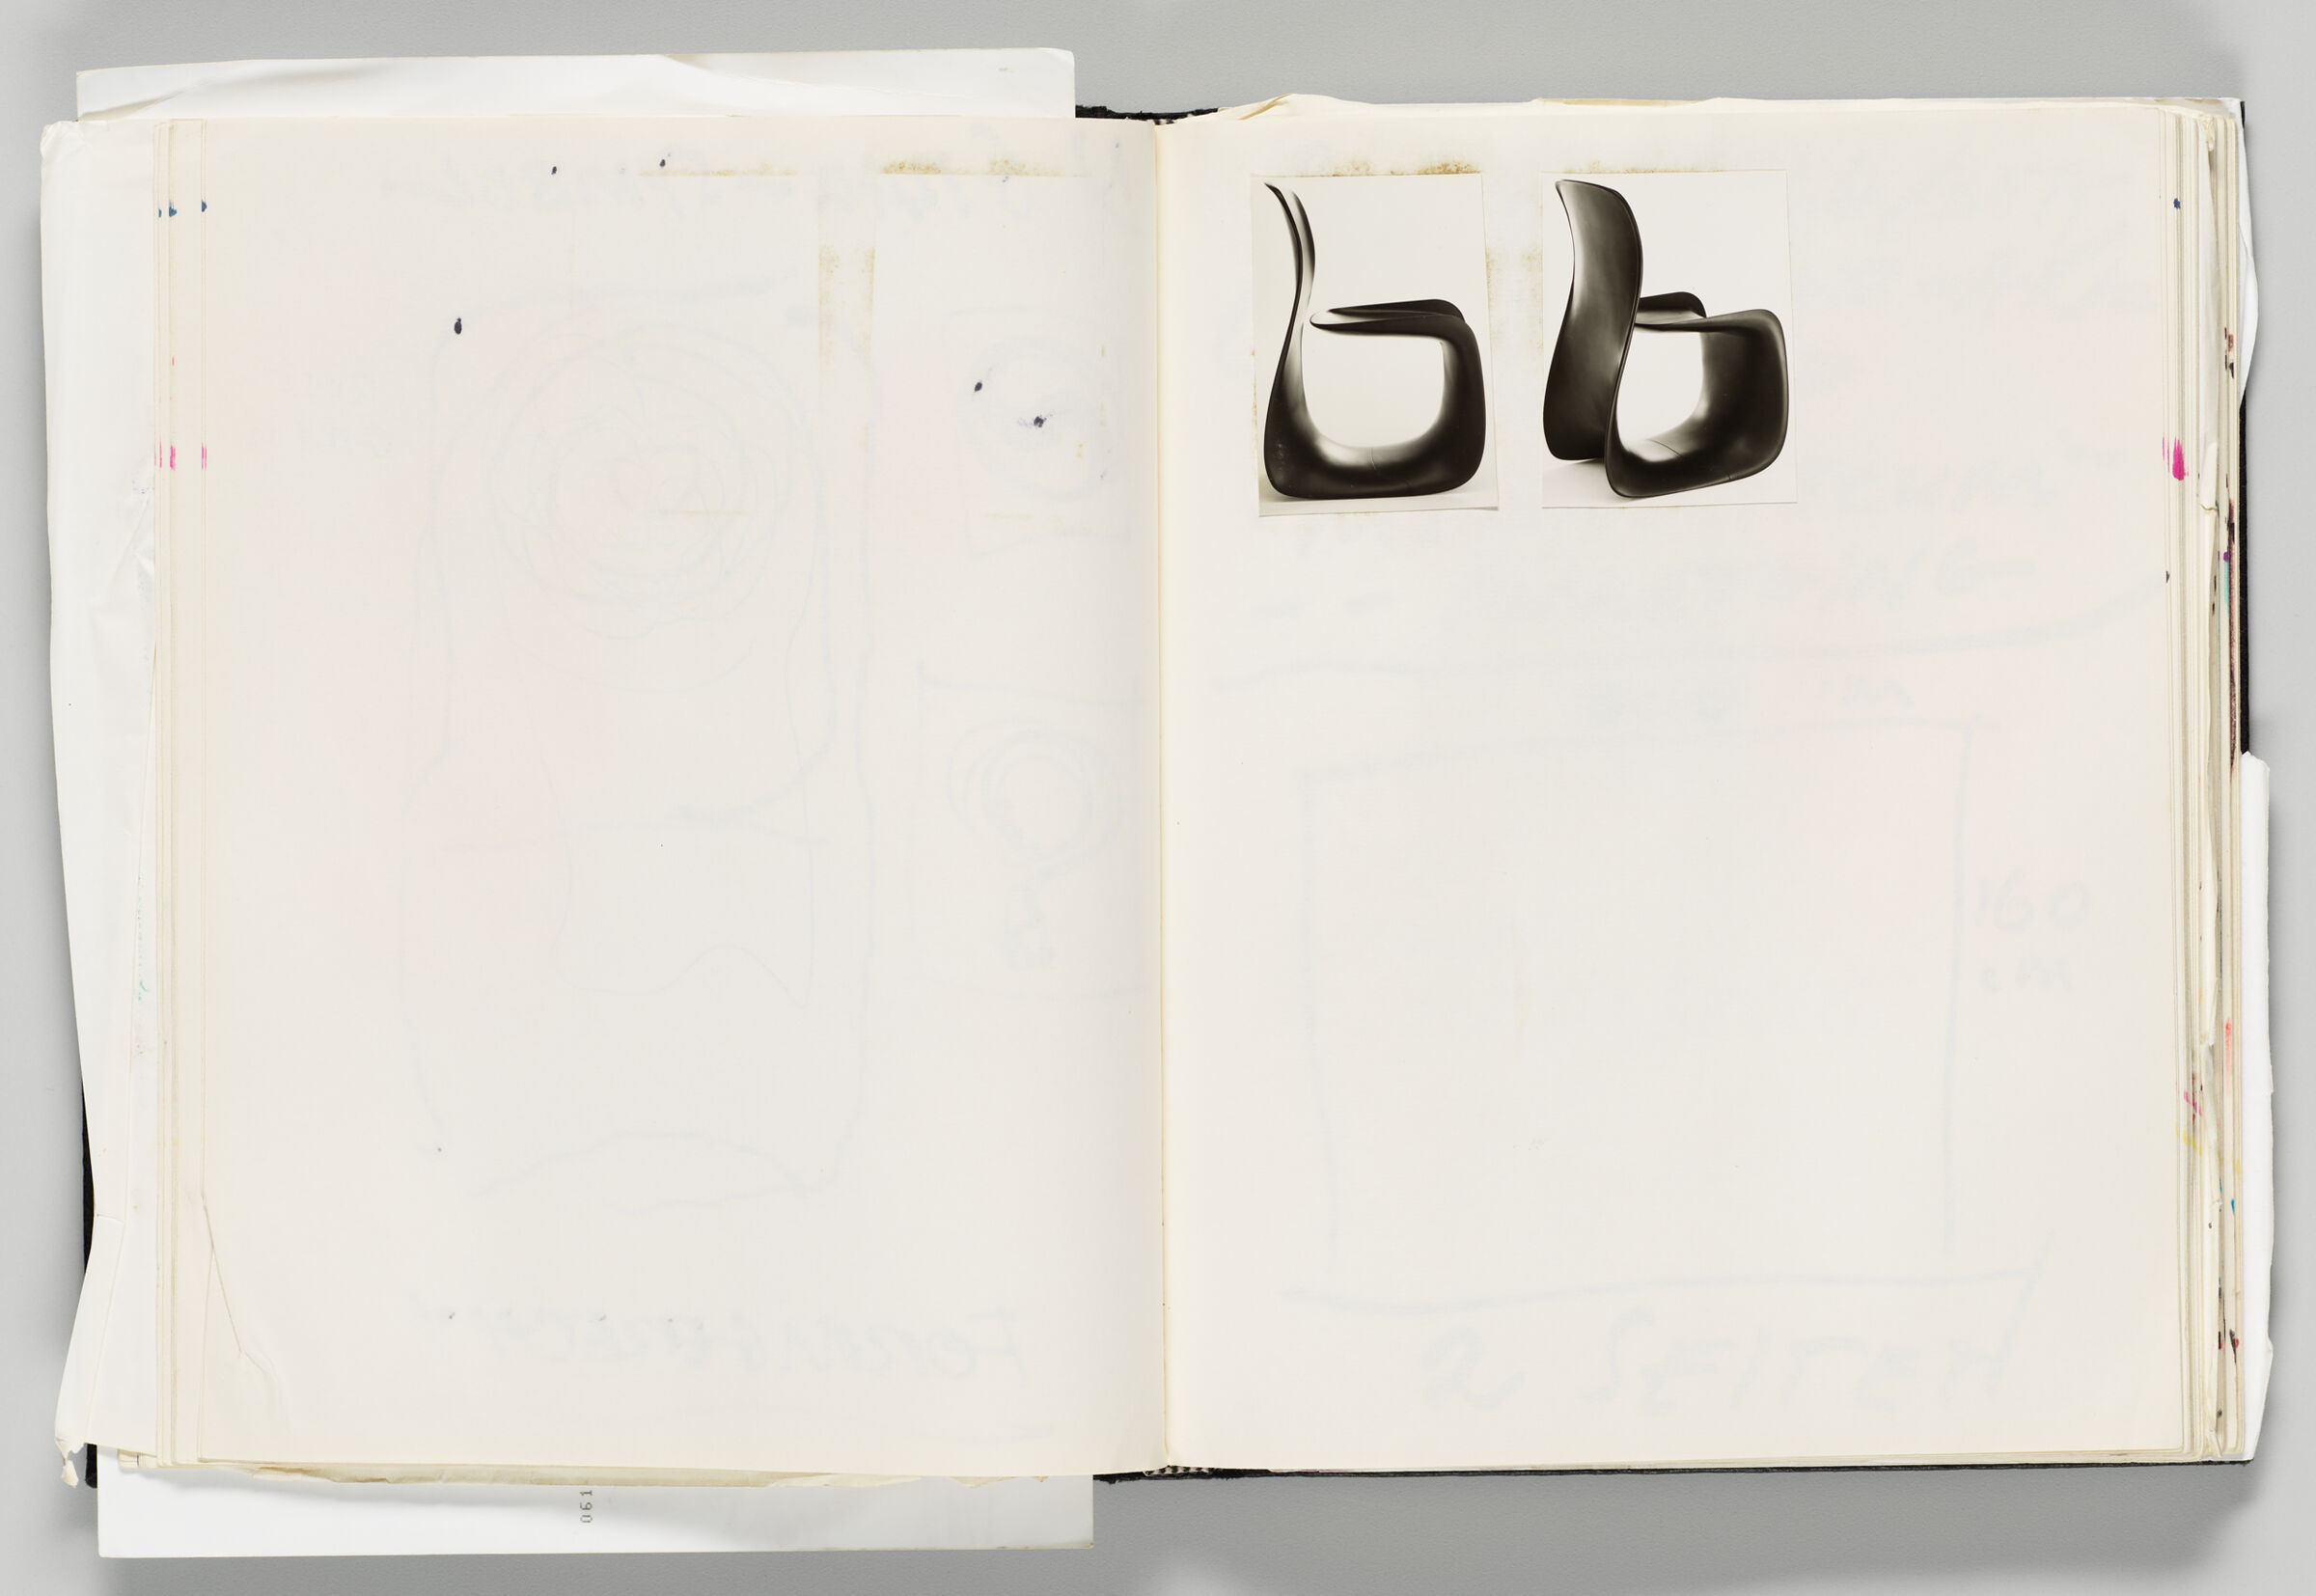 Untitled (Blank, Left Page); Untitled (Adhered Photographs Of Rosenthal Chairs, Right Page)